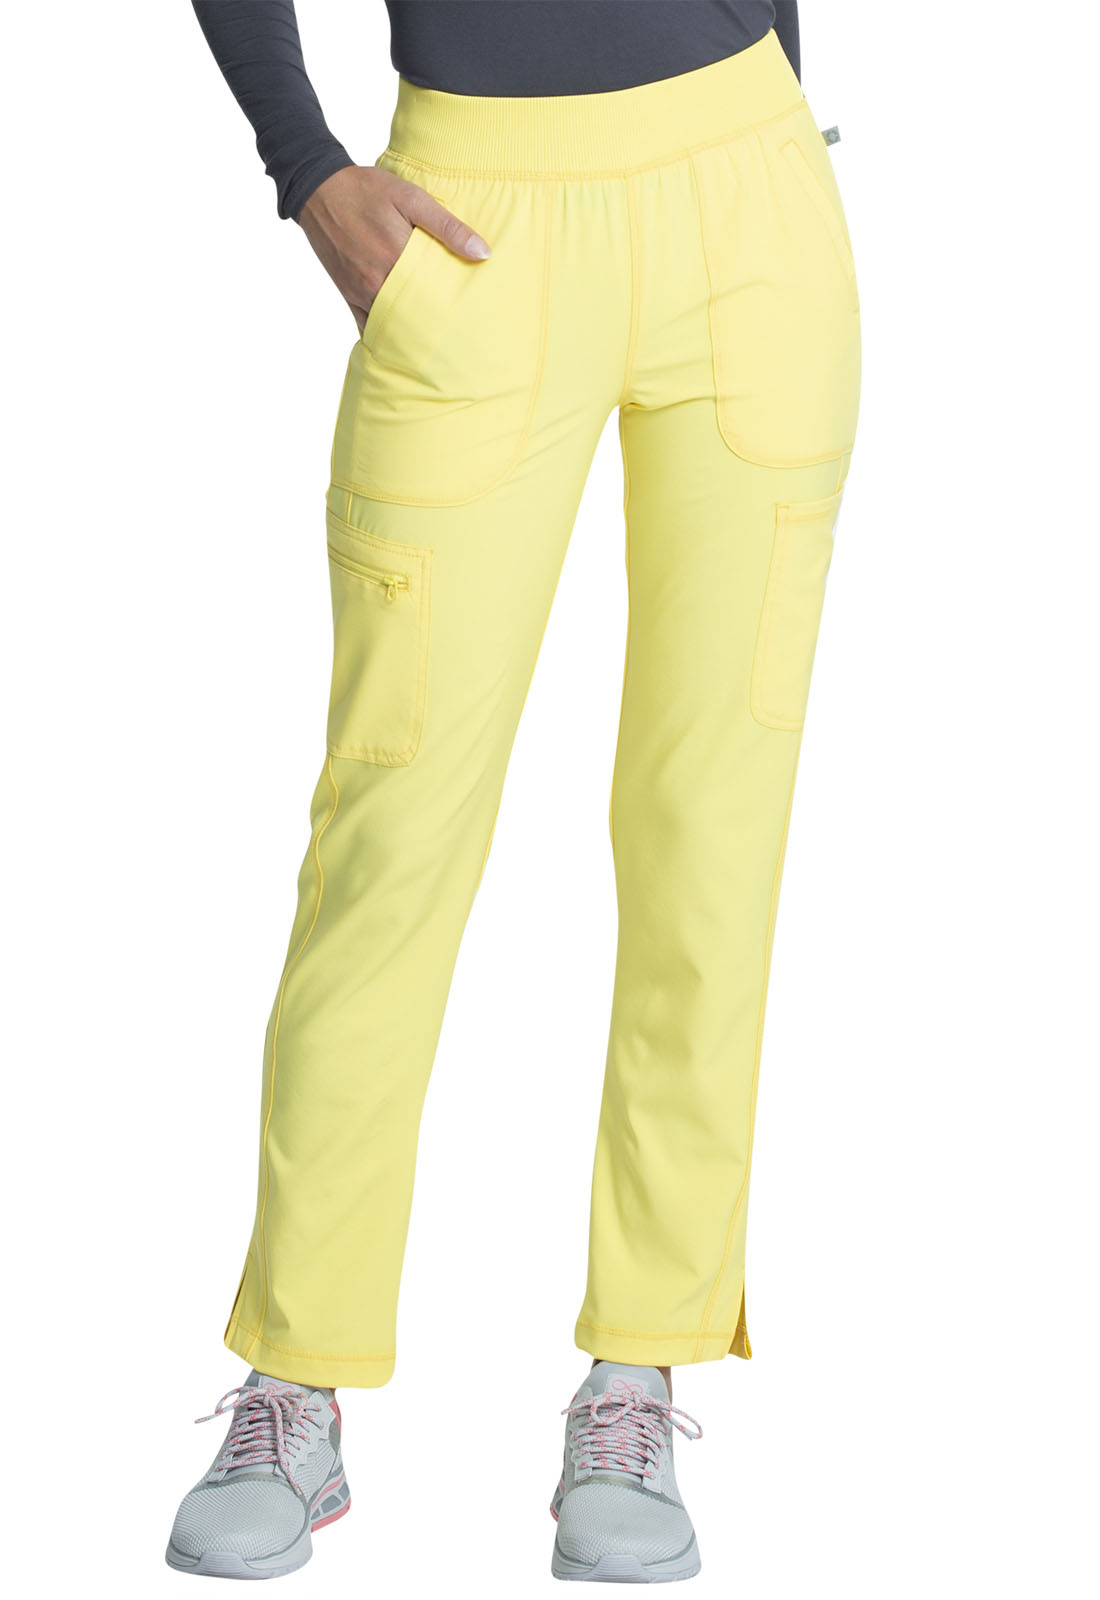 Women's Scrub Pant Mid Rise Tapered Leg Pull-on by Cherokee CK065 SALE